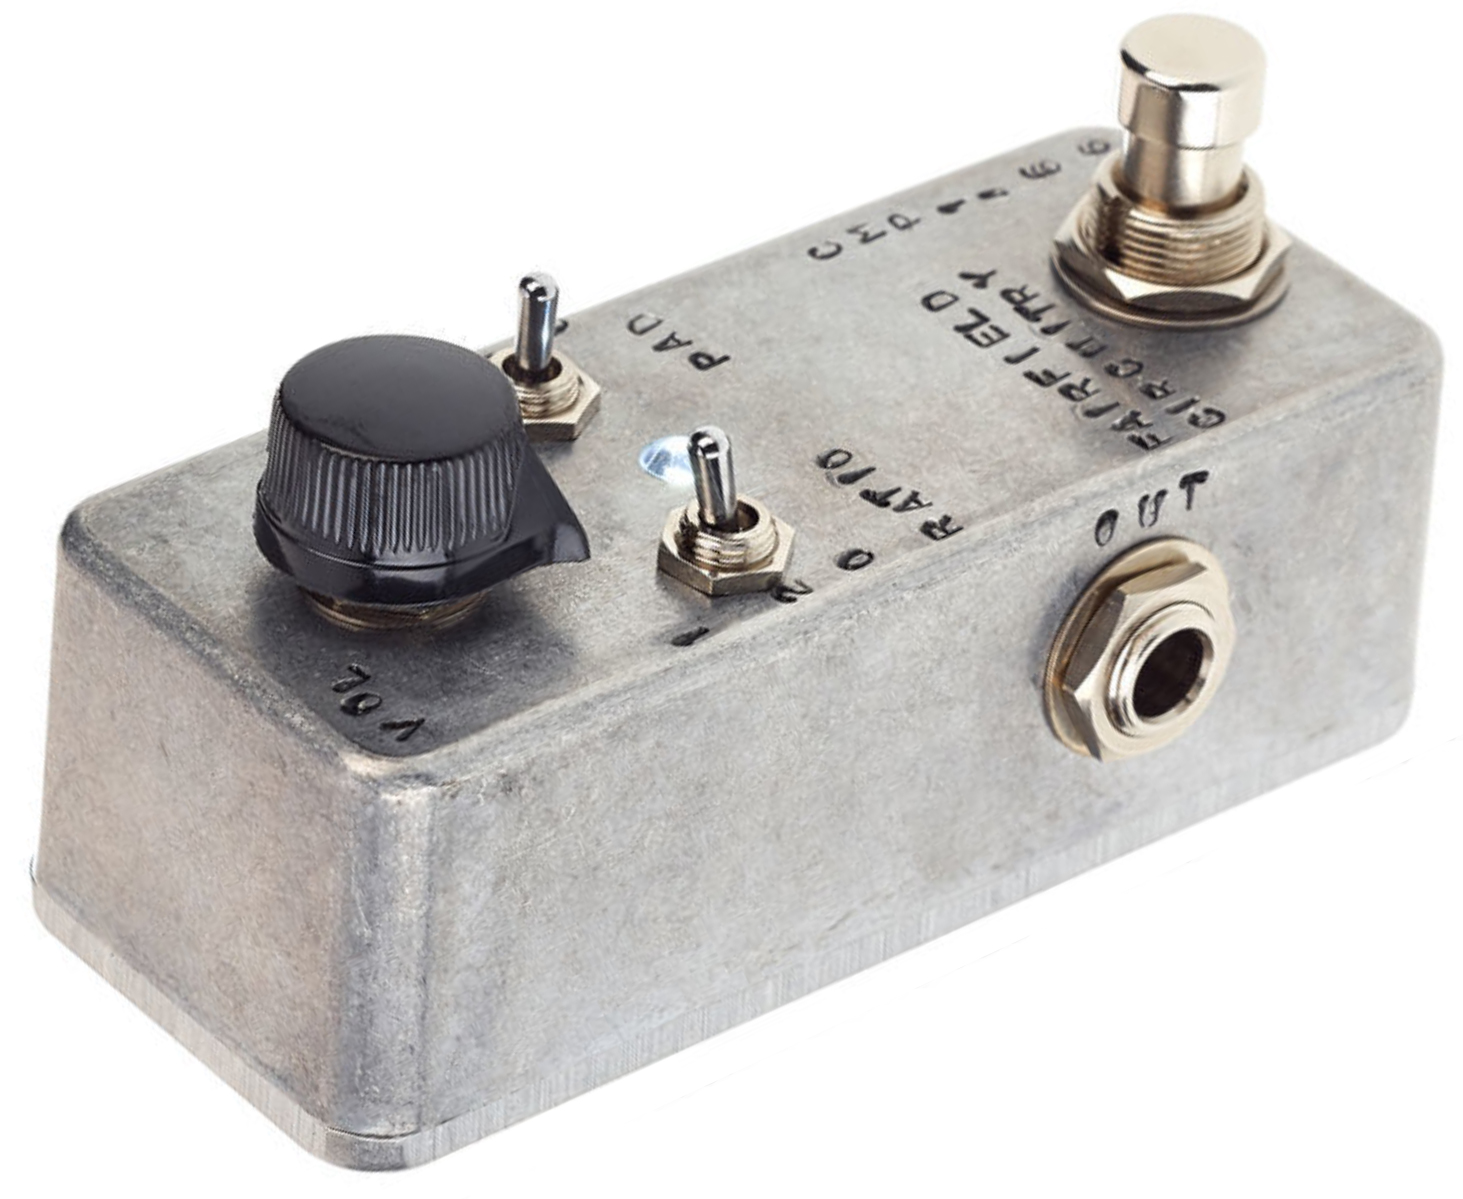 Fairfield Circuitry The Accountant Compressor - Pedal compresor / sustain / noise gate - Variation 2